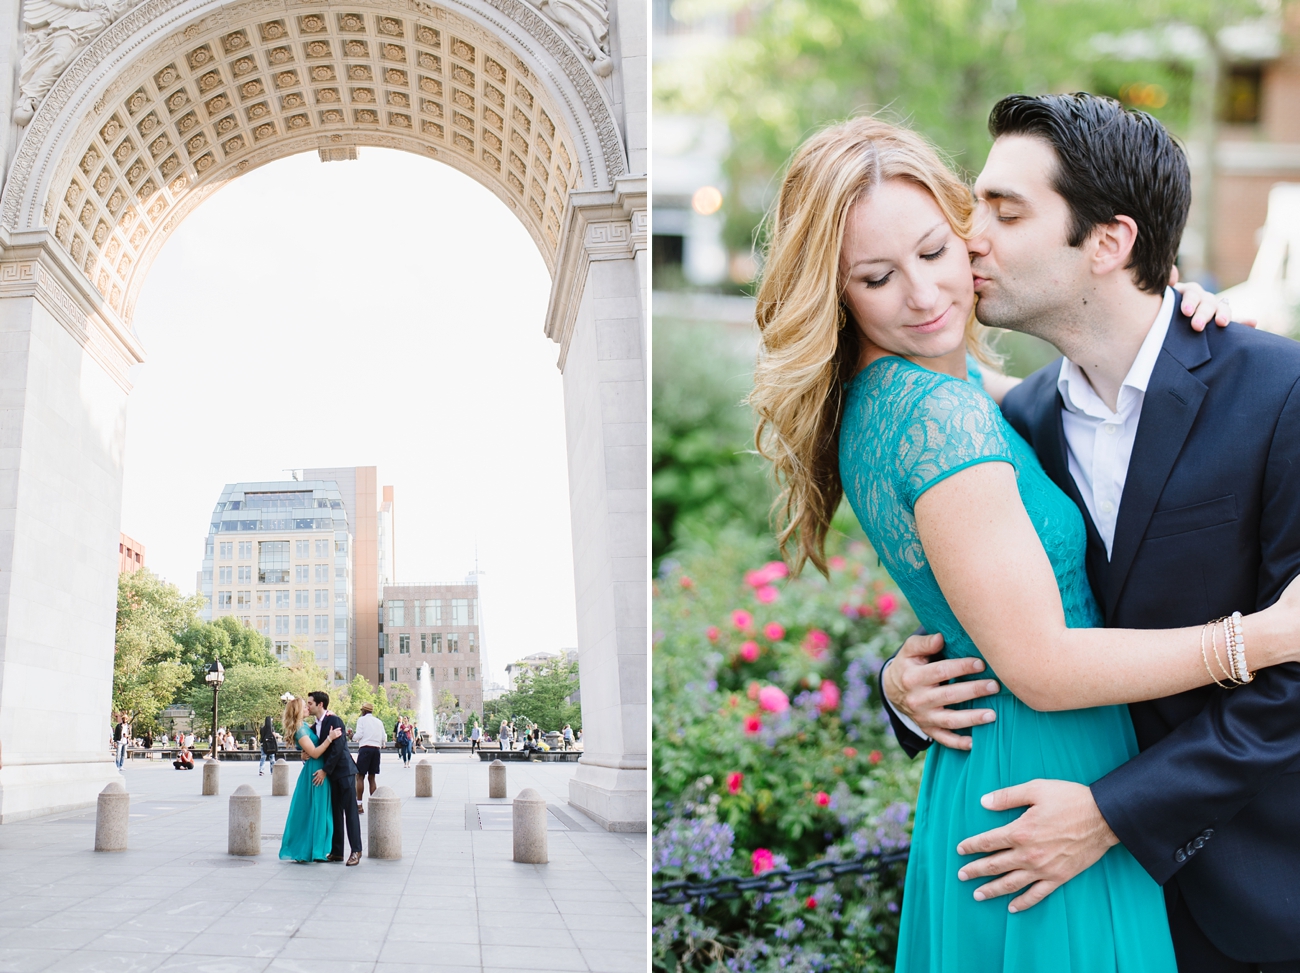 West Village Engagement Pictures - New York City